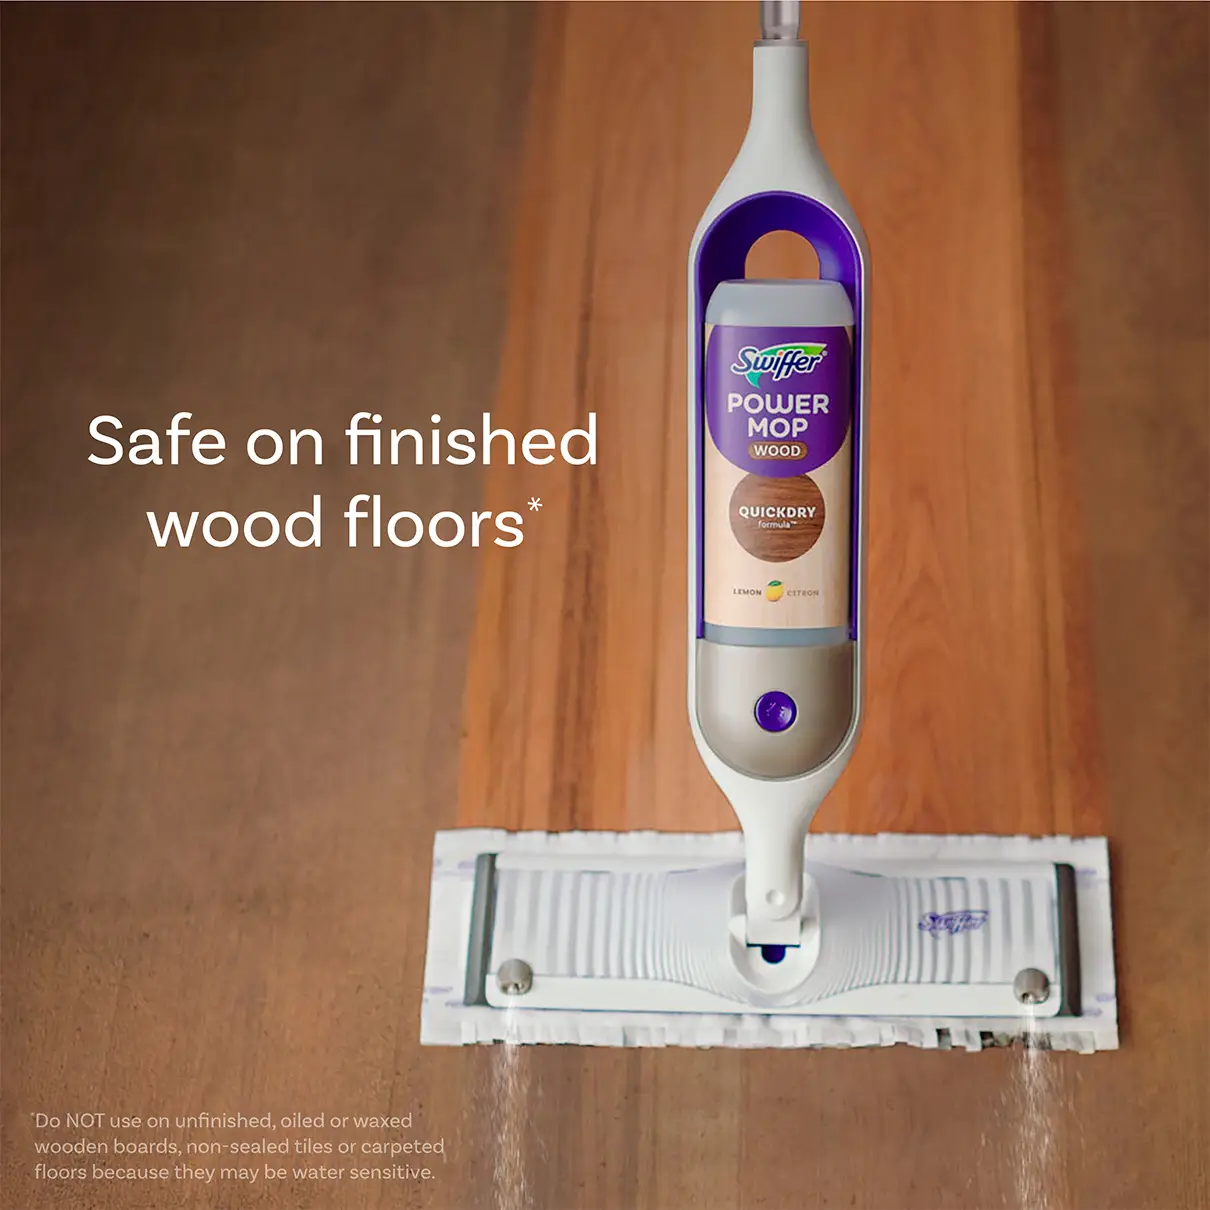 How to Make Your Wood Floors Shine: 6 Power Tips